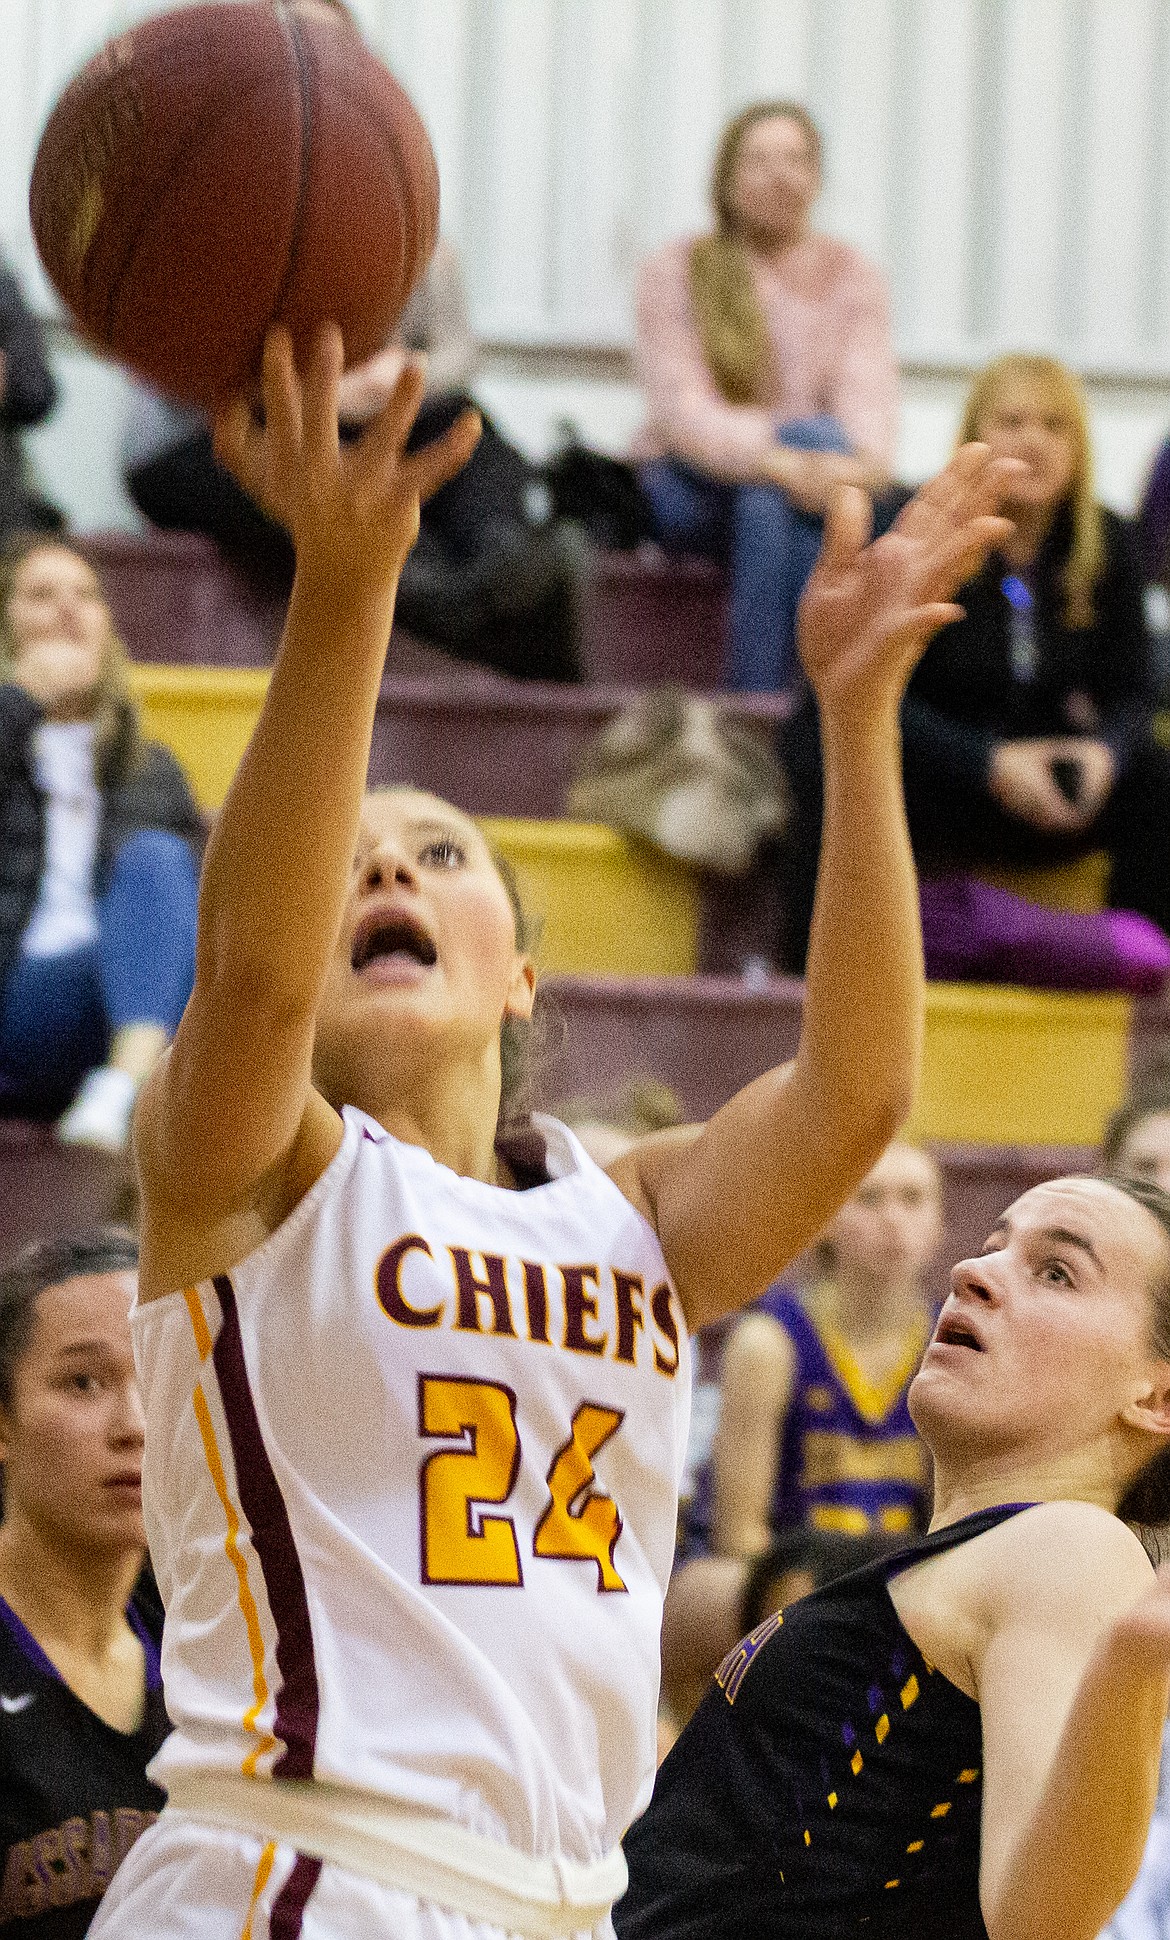 Senior Moses Lake guard Madisyn Clark drives to the hole for the score. Clark will continue her playing career at Western Oregon University next season.